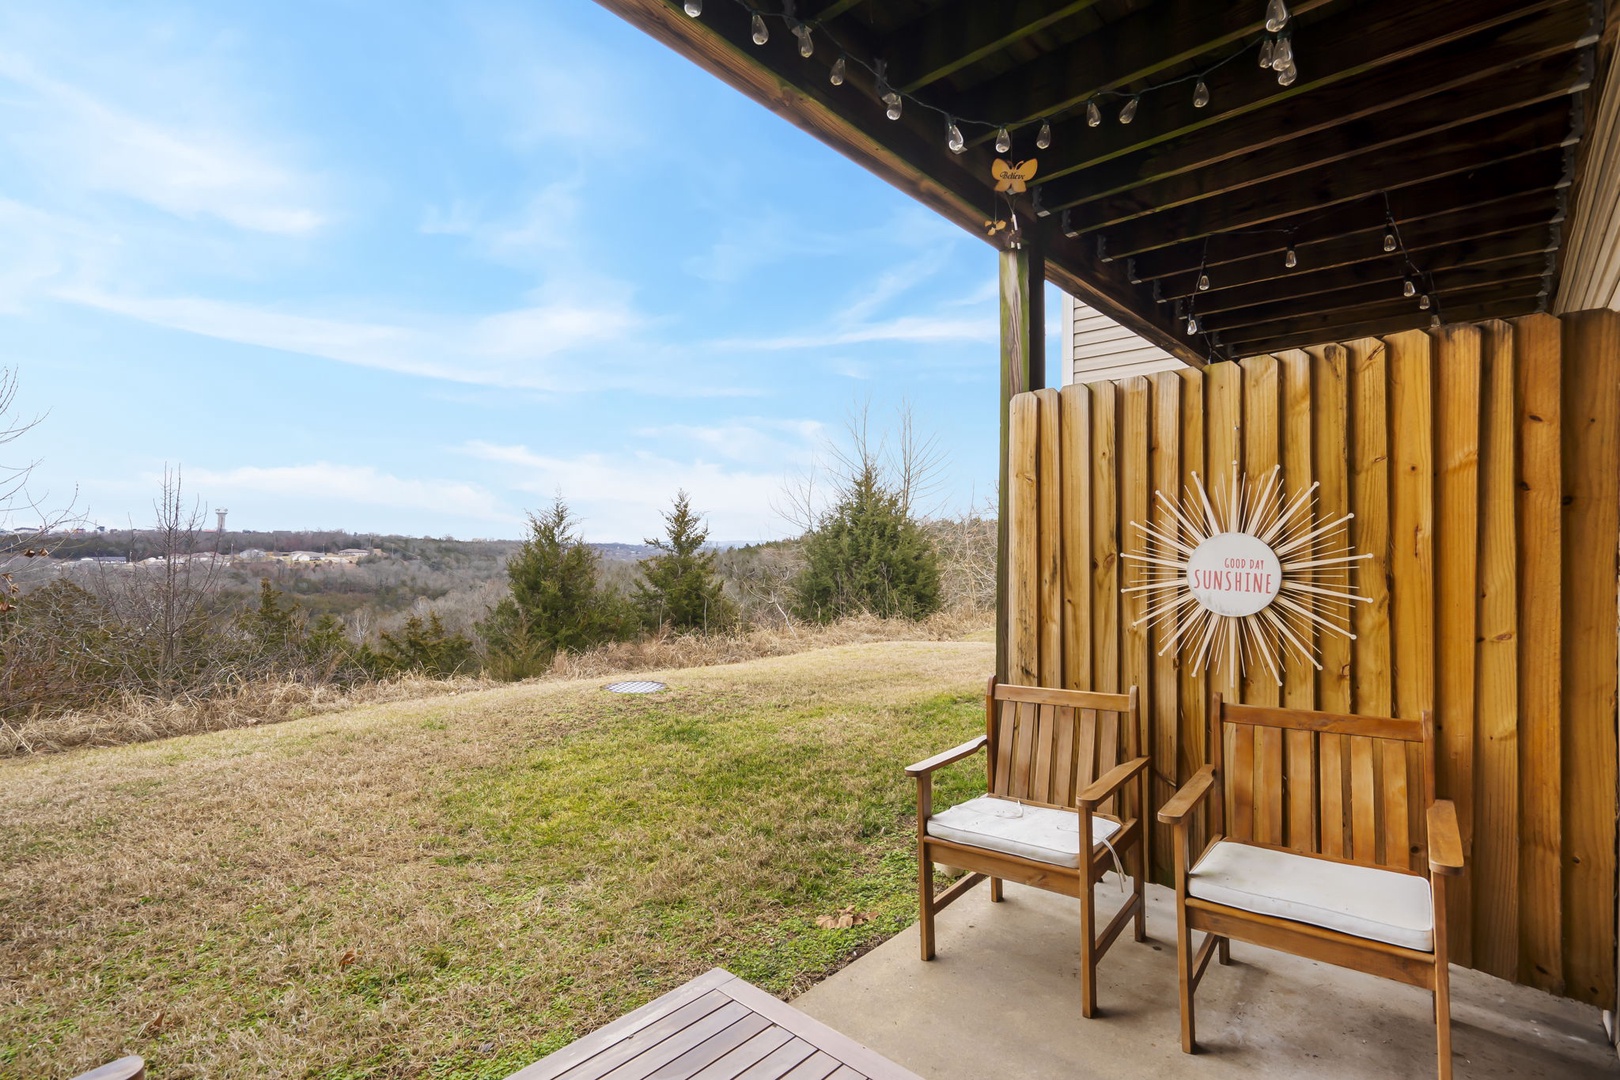 Kick back & relax with gorgeous natural views on the shaded patio